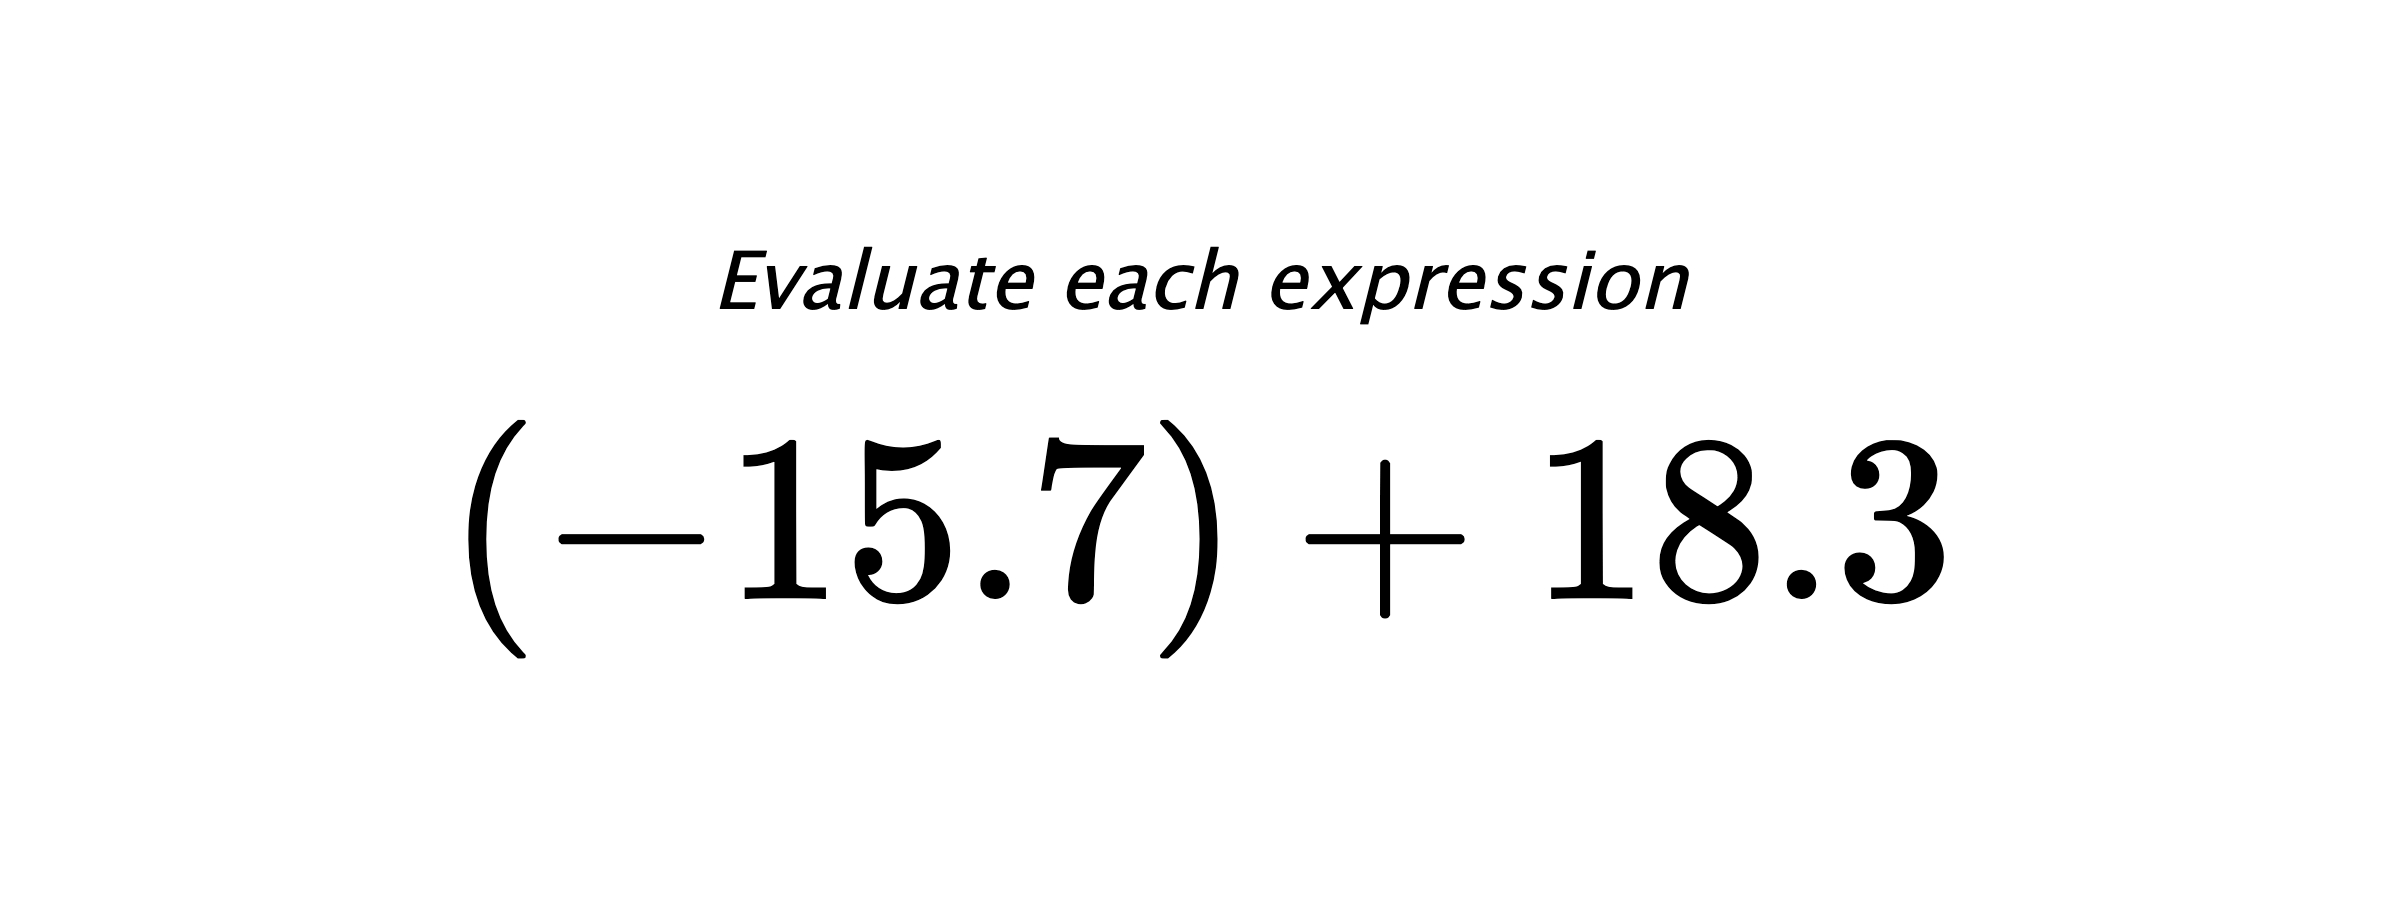 Evaluate each expression $ (-15.7)+18.3 $